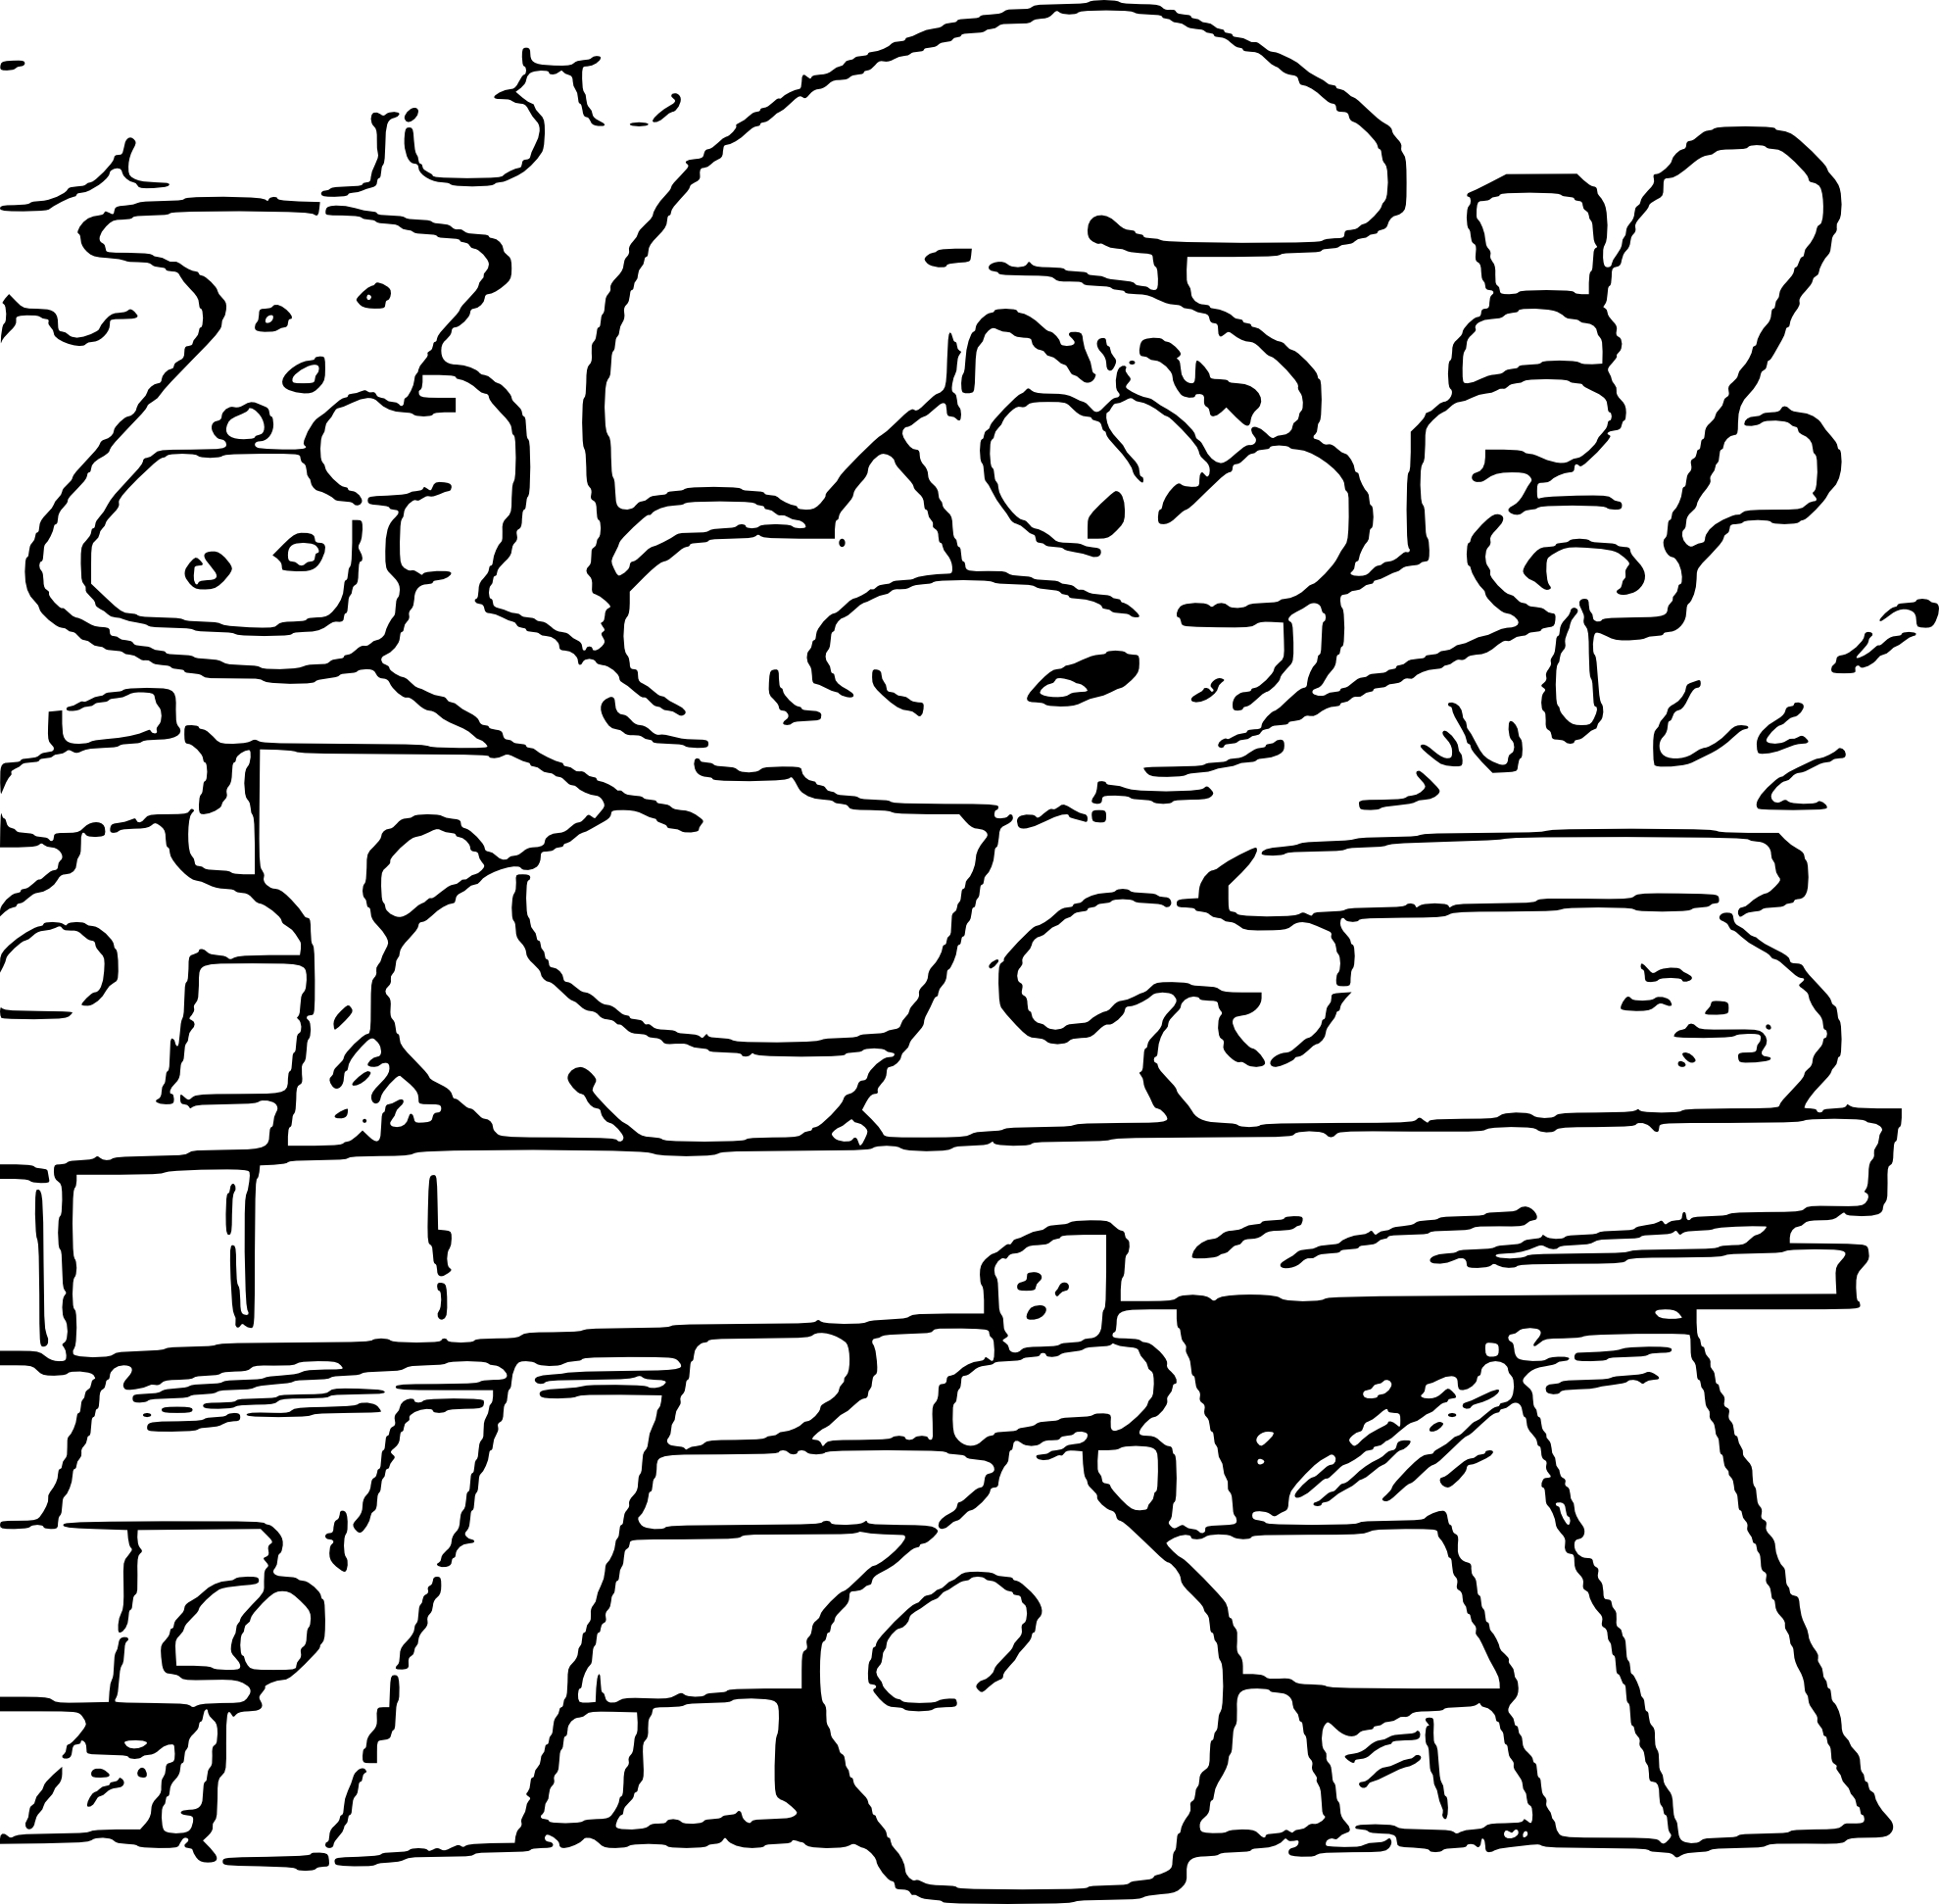 Smurfs The Movie coloring page